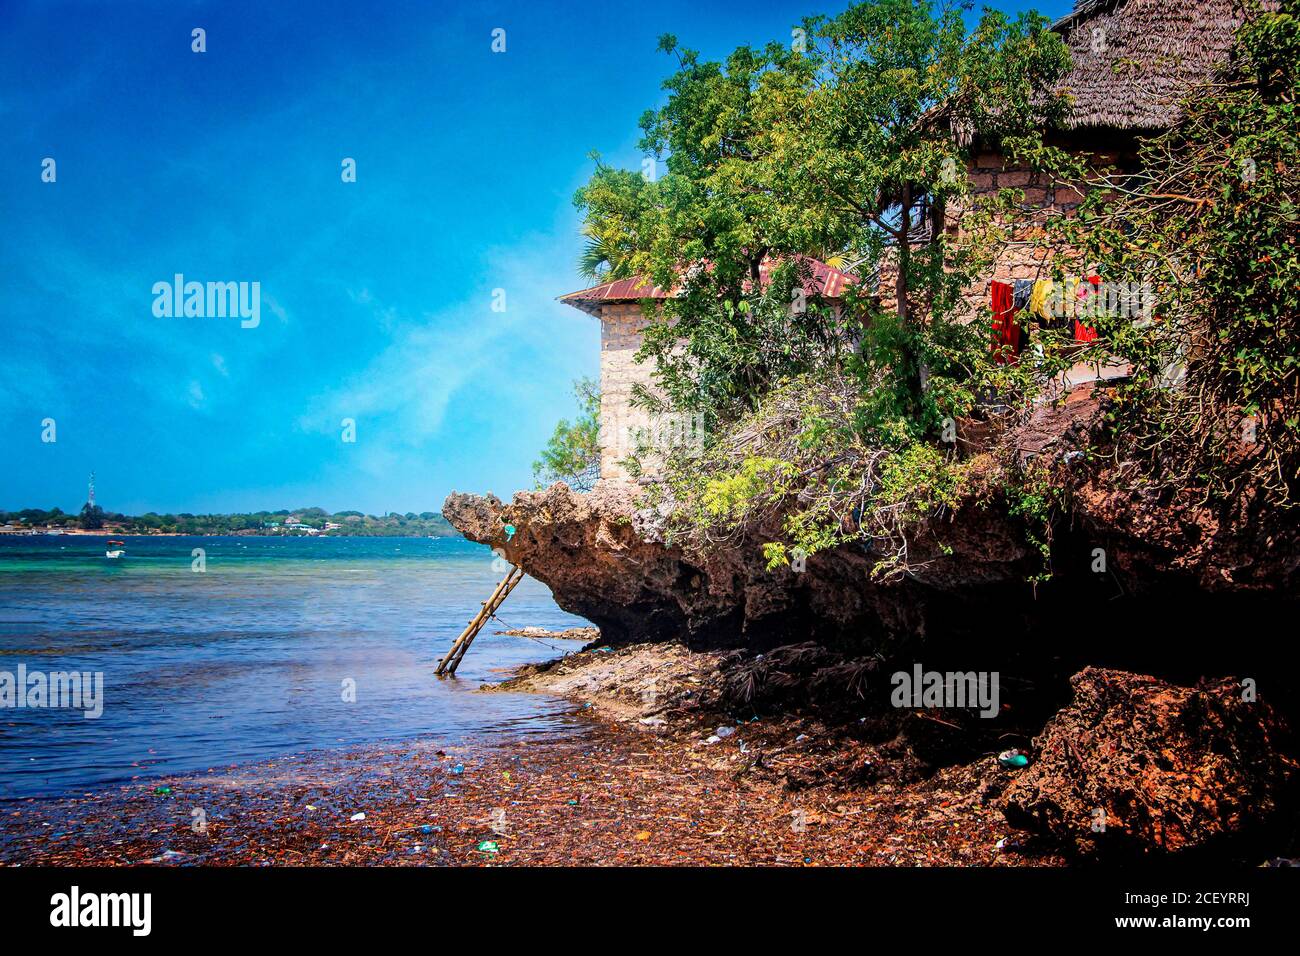 A small house on a cliff above the sea on the island of Kisite in Kenya. It's the Indian Ocean. A ladder leads into the water. There is a sea Stock Photo